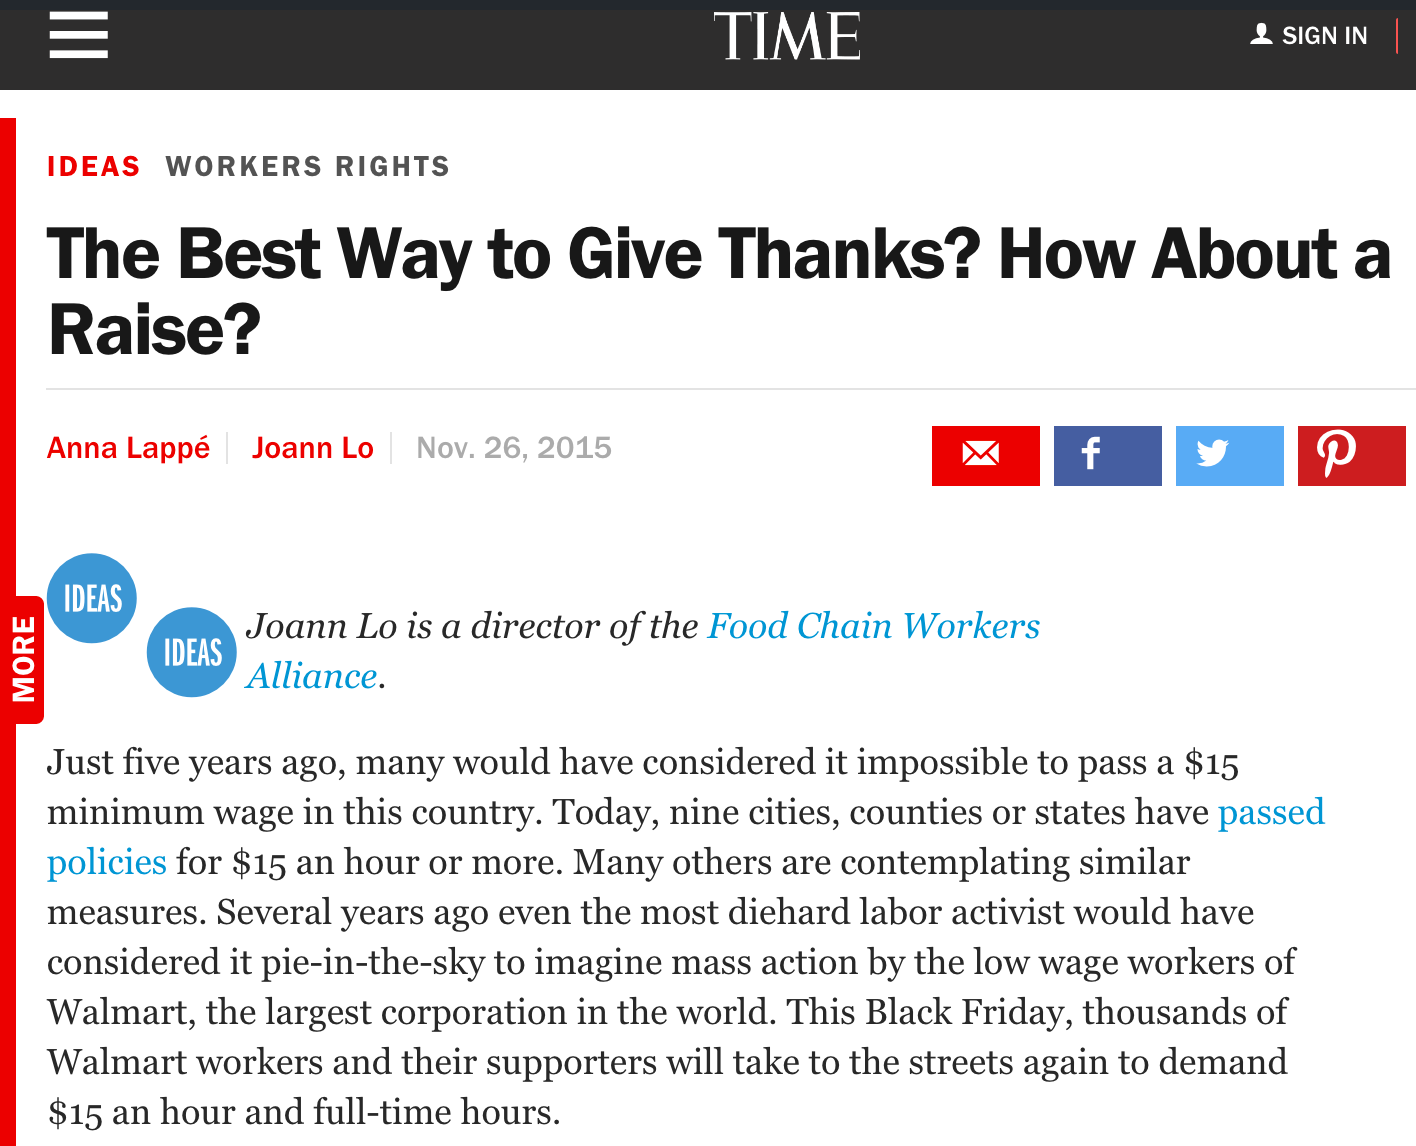 TIME: The Best Way to Give Thanks? How About a Raise?